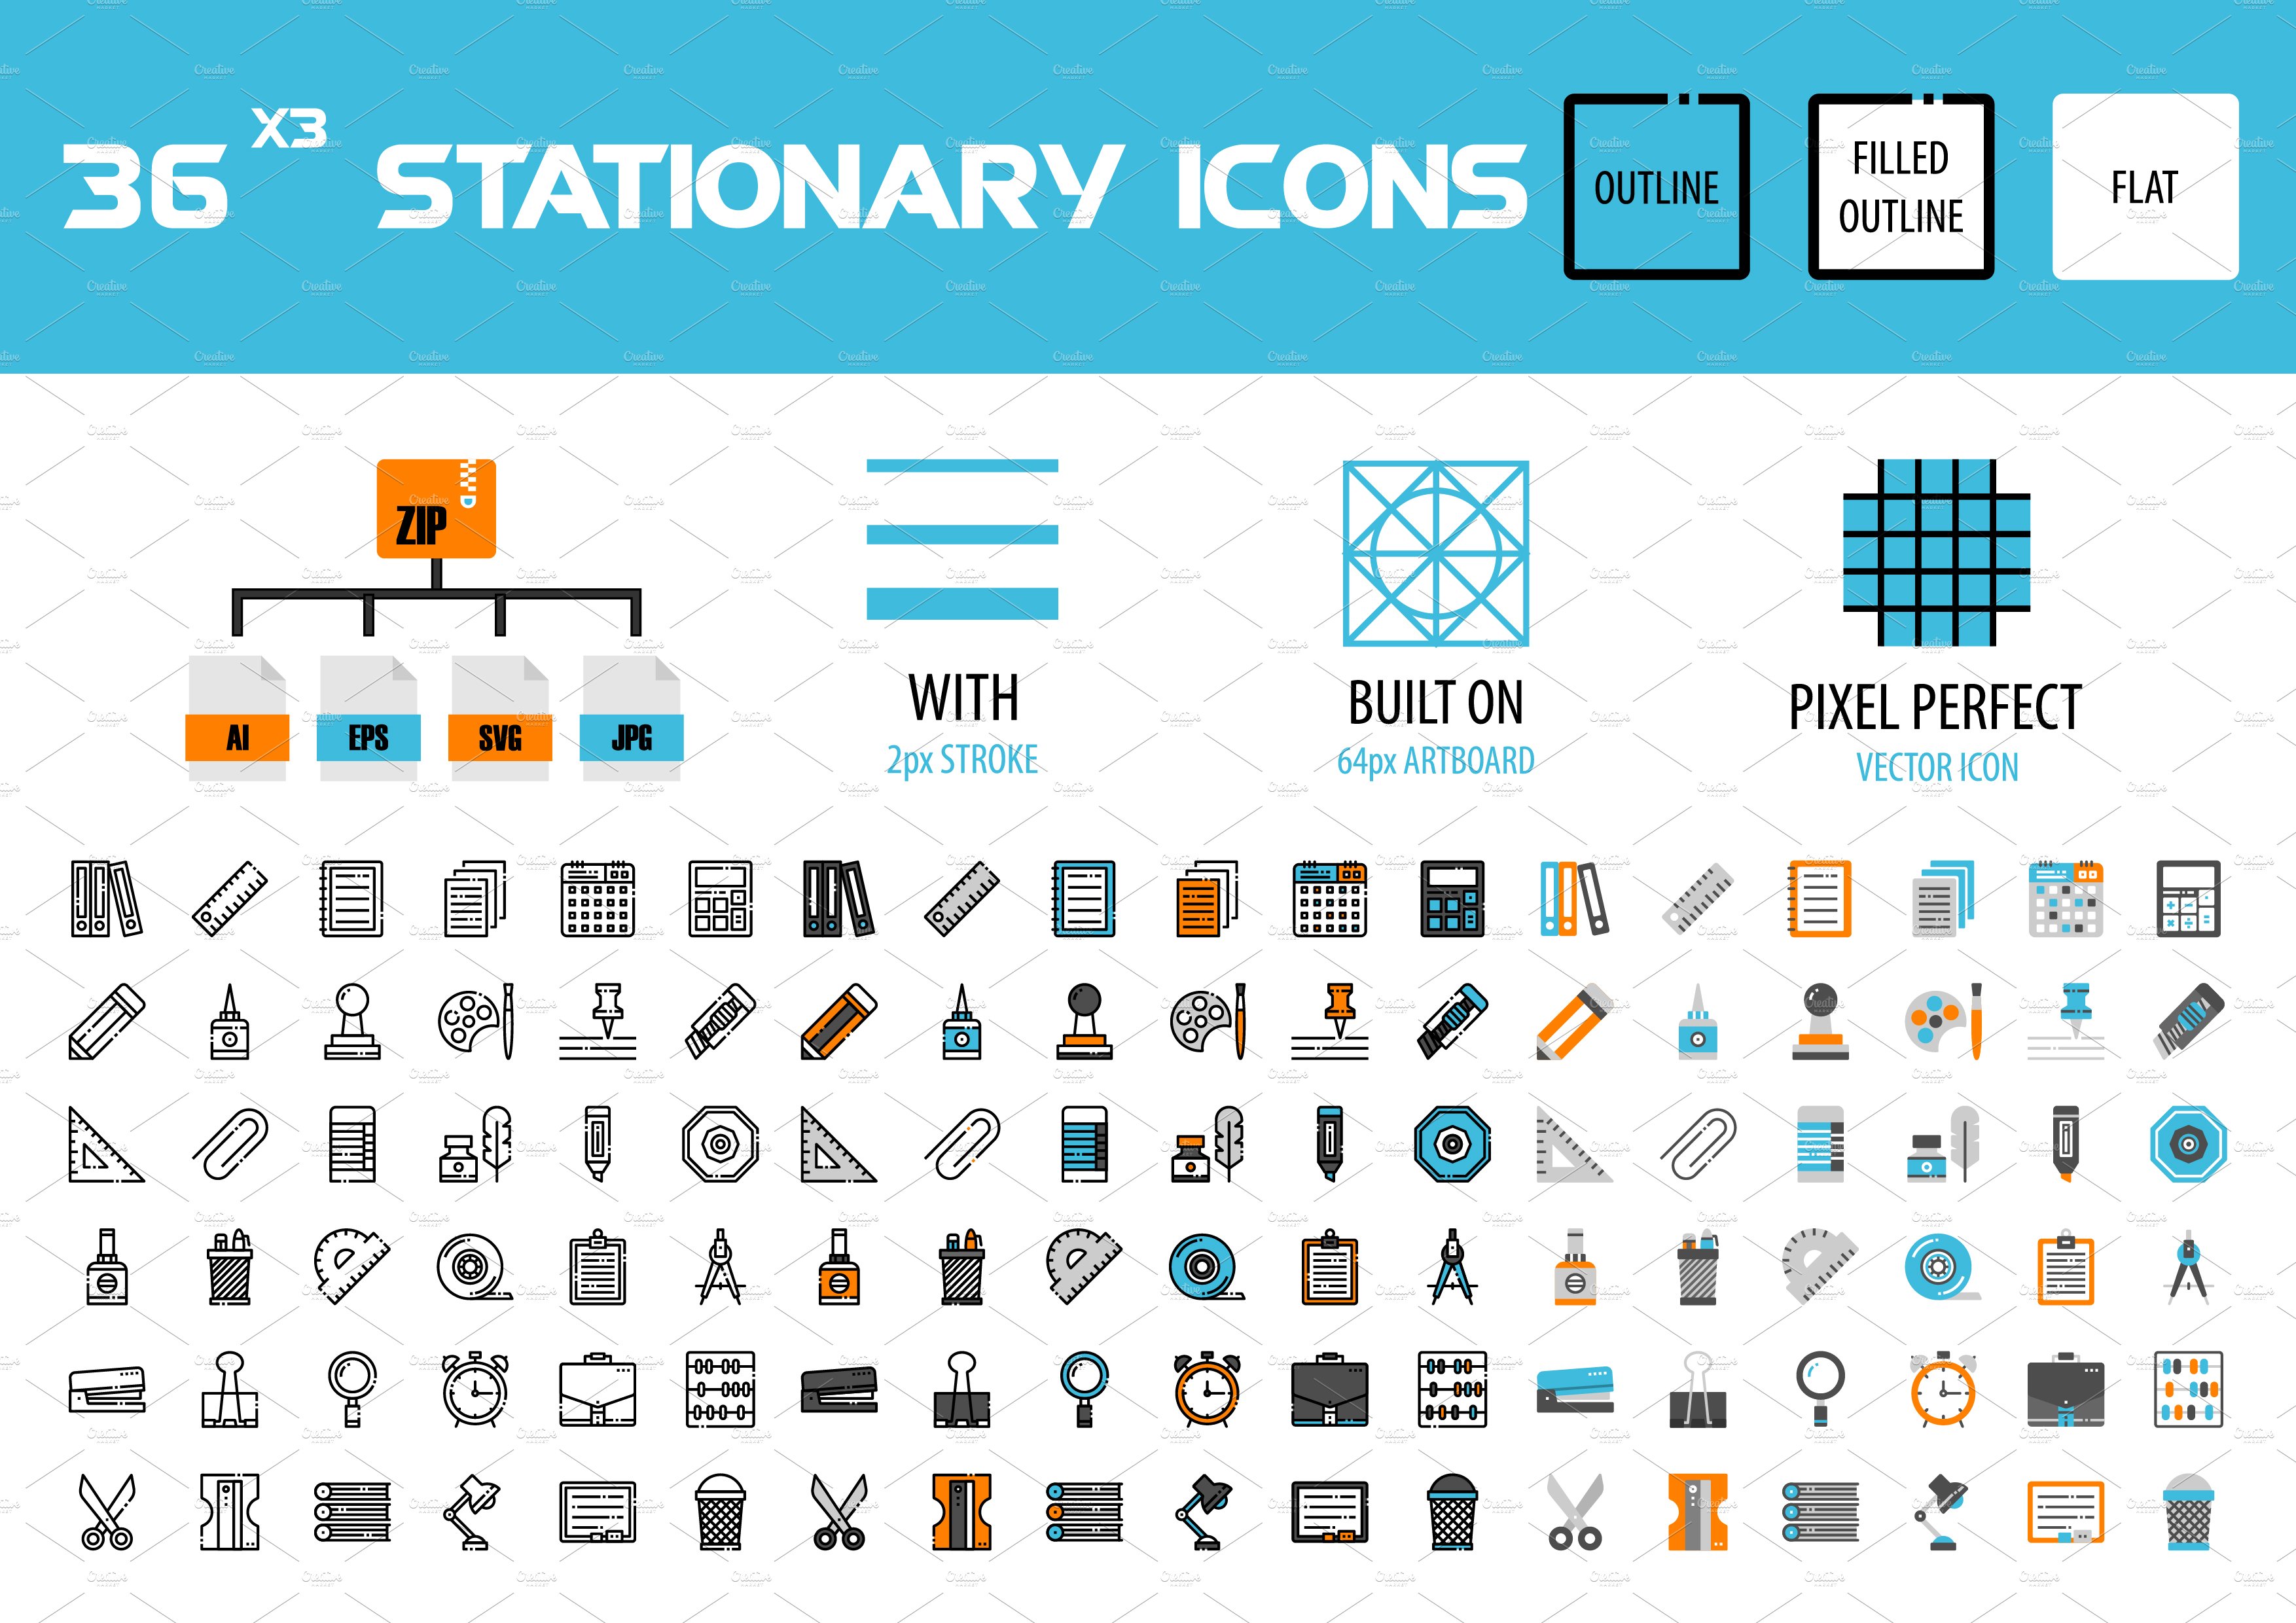 36x3 Stationary icons preview image.